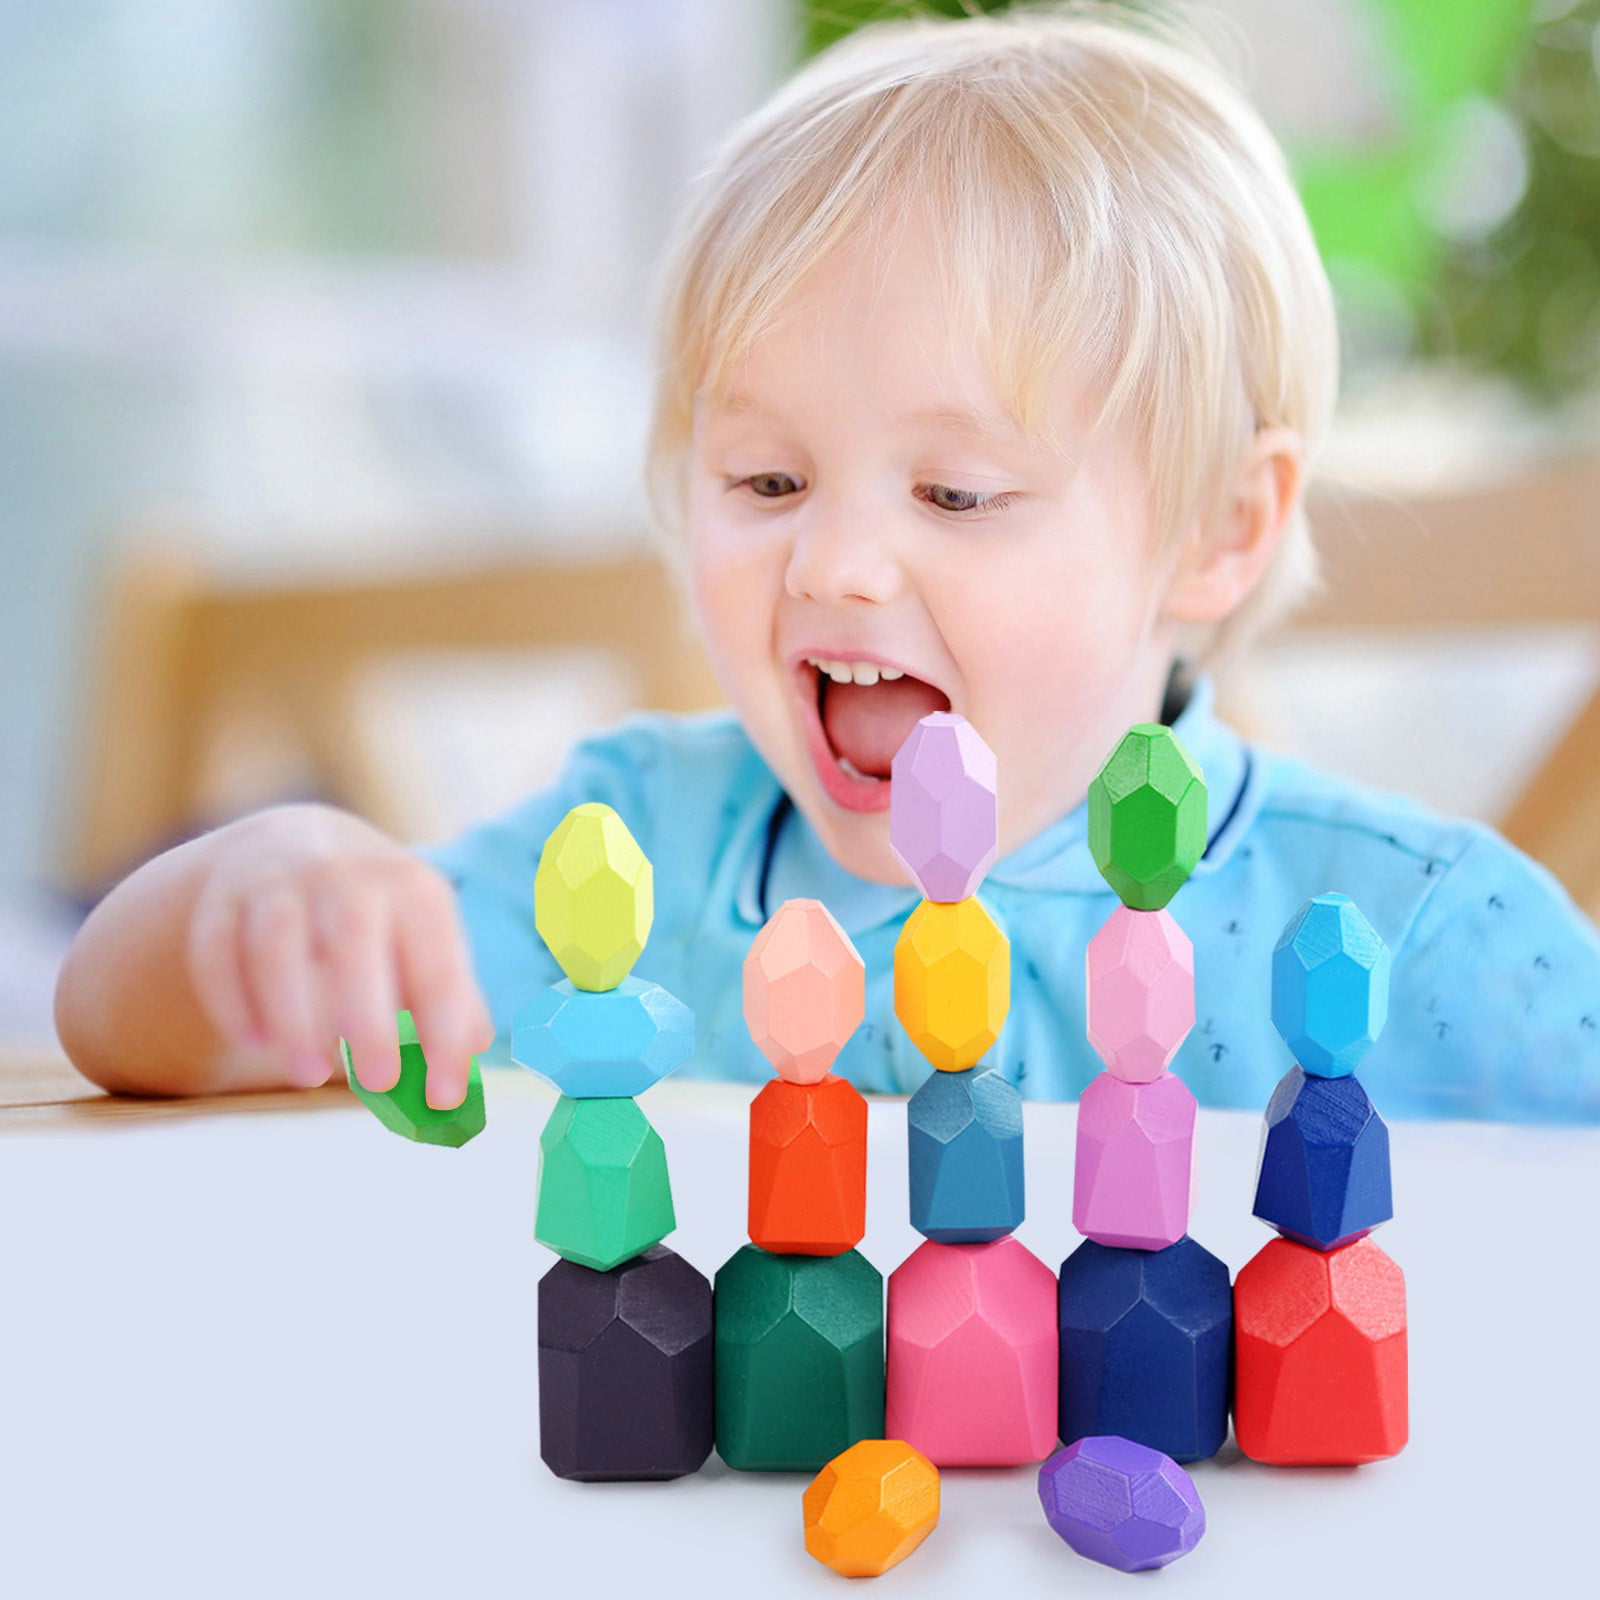 Wooden Stacking Toys Stones Montessori for Toddlers 20Pcs Building Block Set 